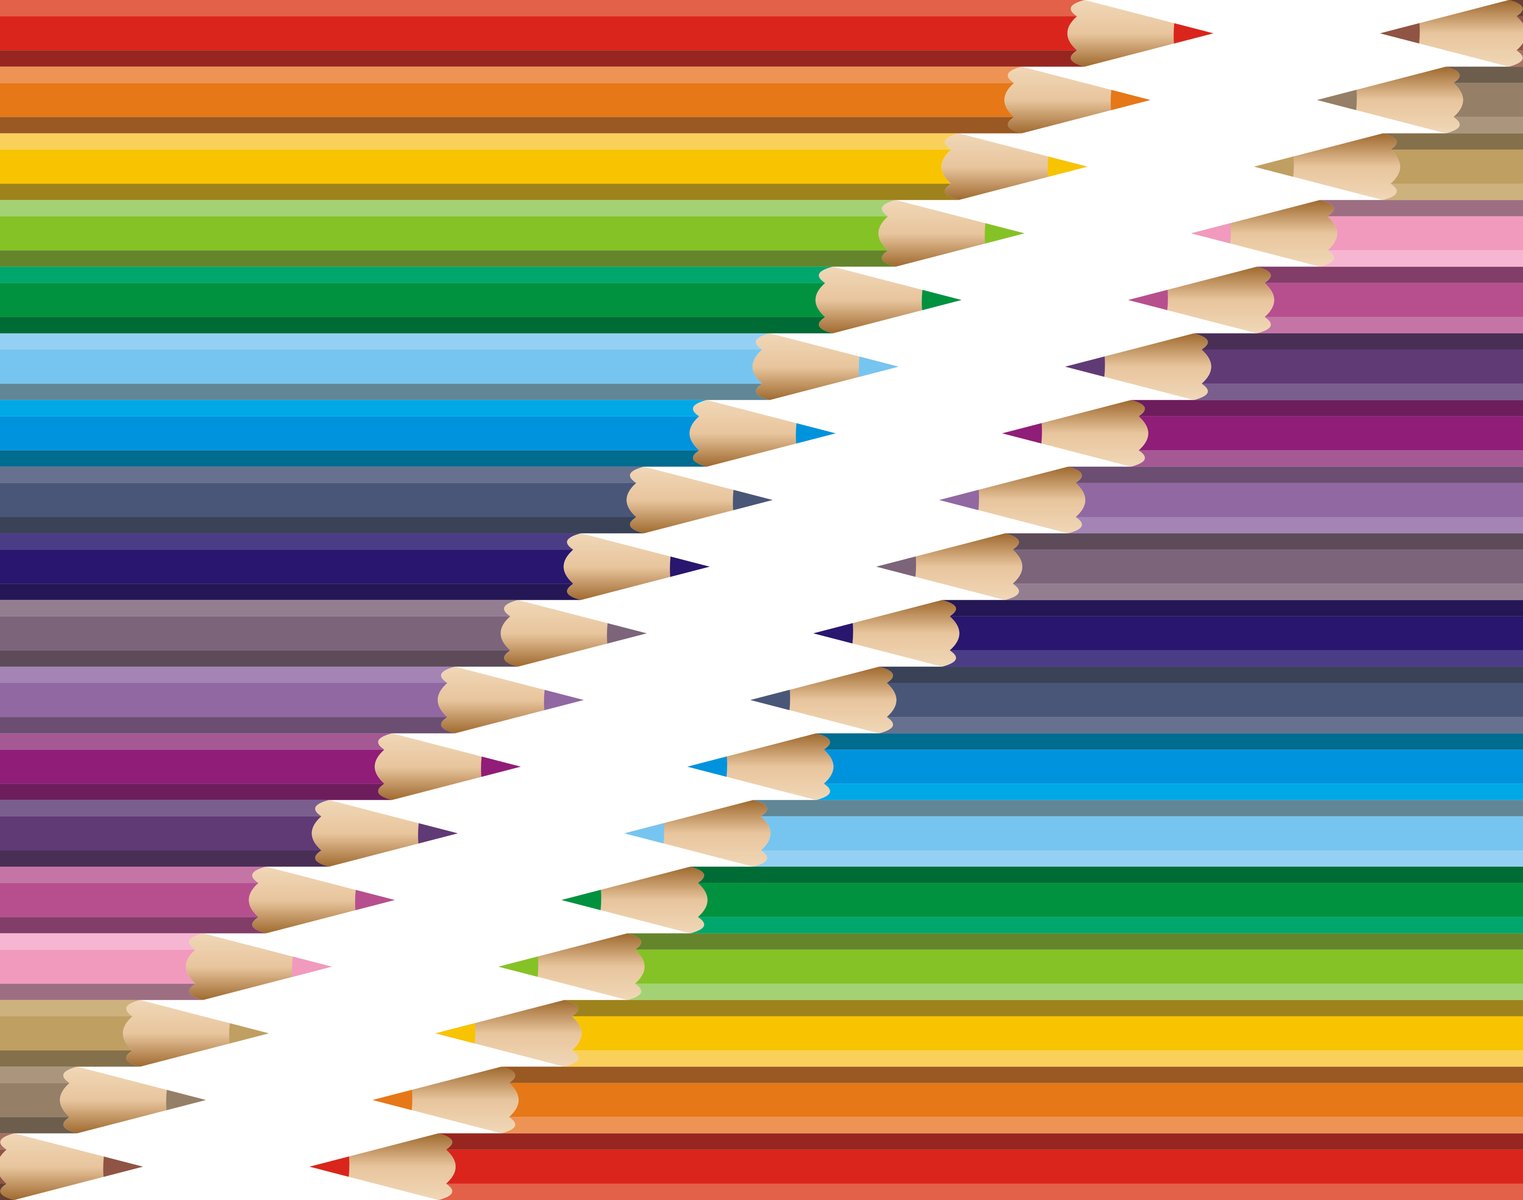 colored pencils arranged in a diagonal pattern